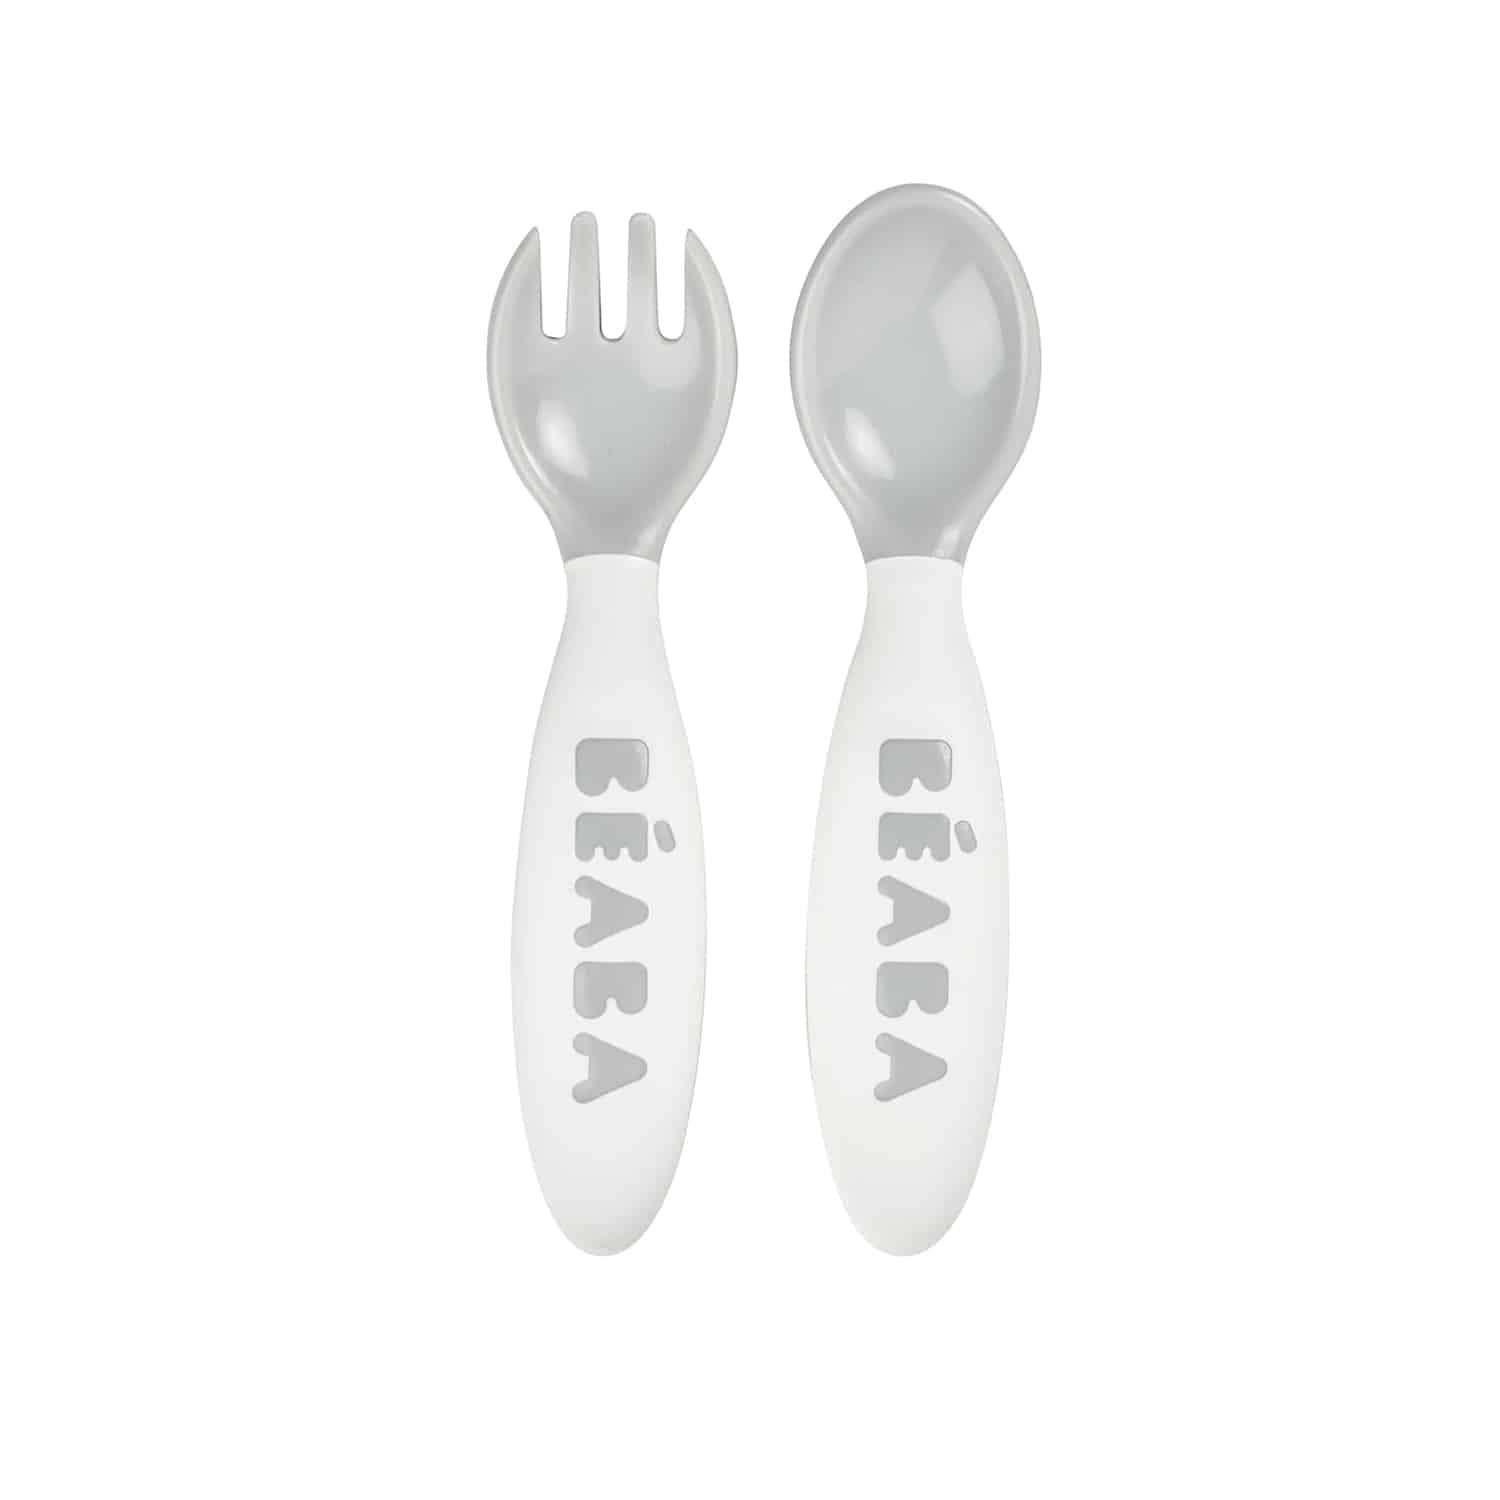 SPOON & FORK BABY FEEDING PLASTIC CUTLERY TRAVEL SET NEW WITH CARRY CASE 